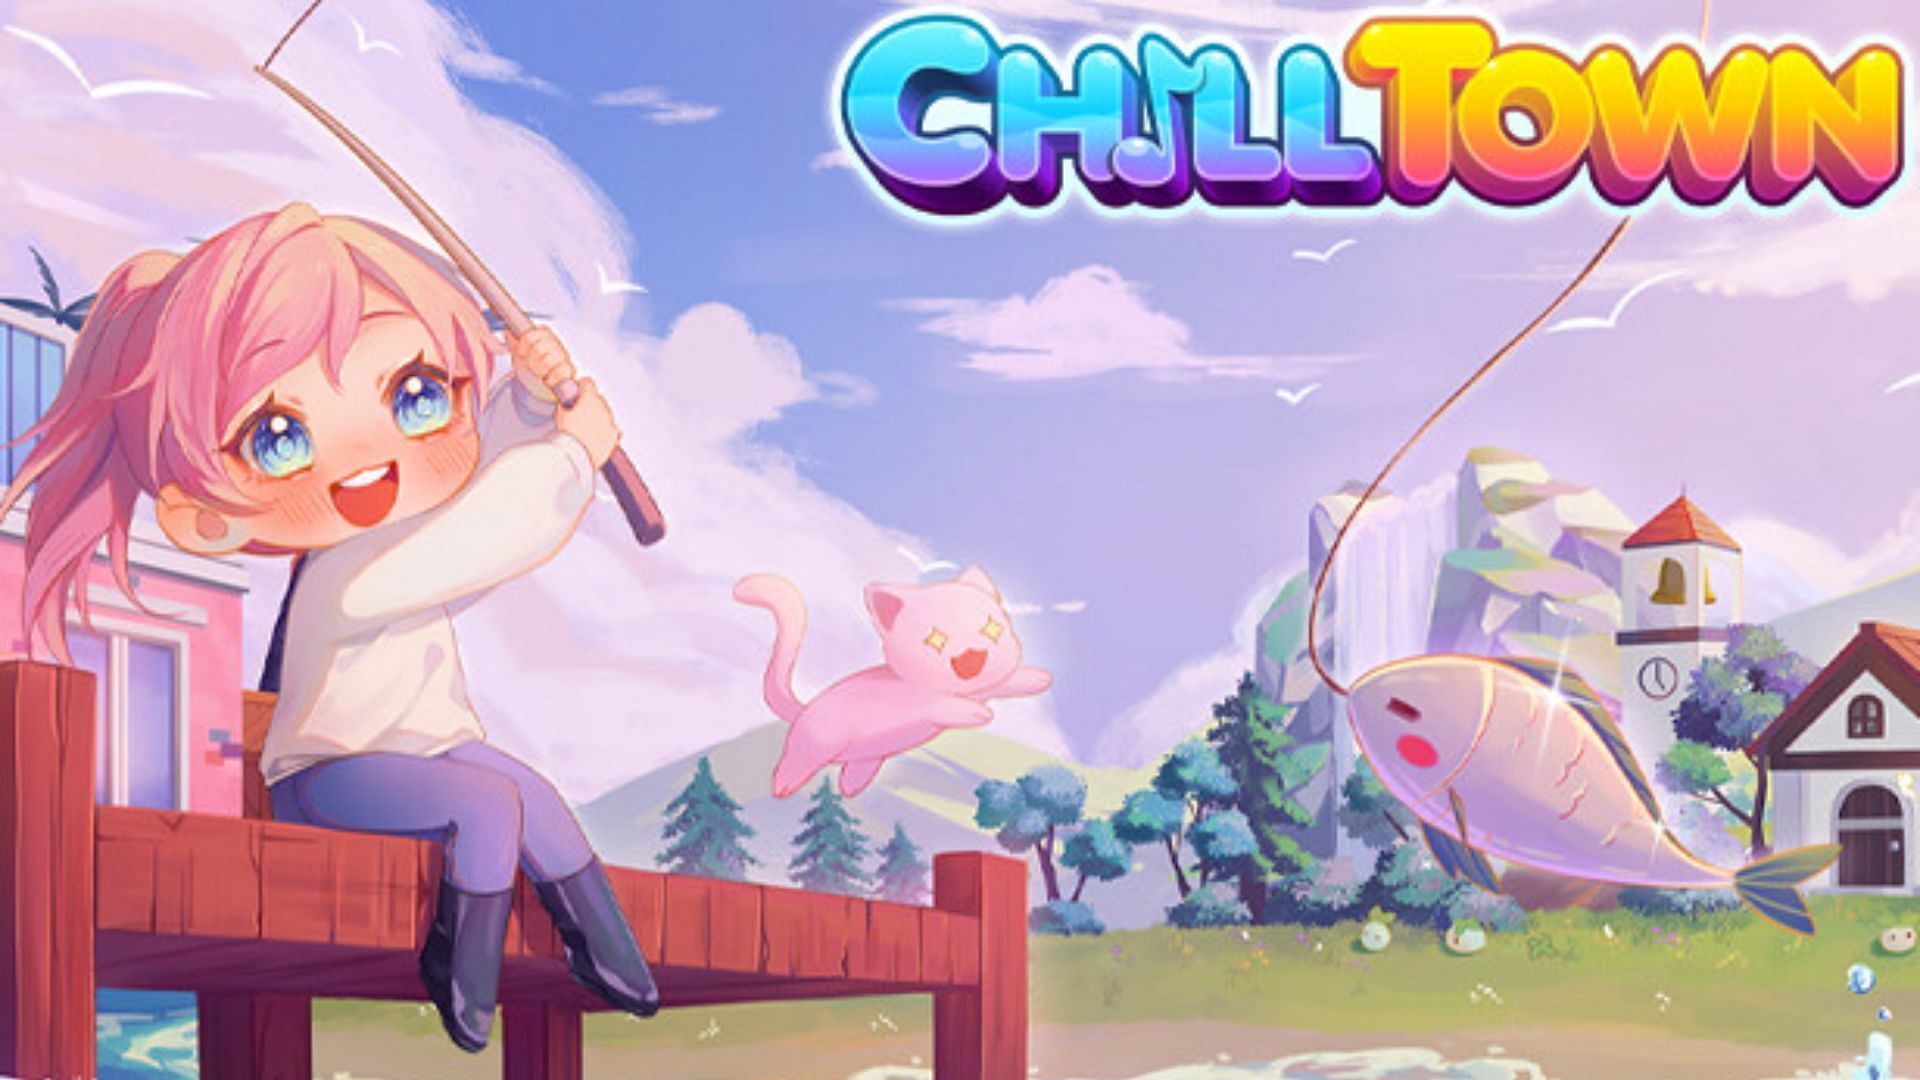 Chill town allows players to explore and fish (Image via Low-Hi Tech)